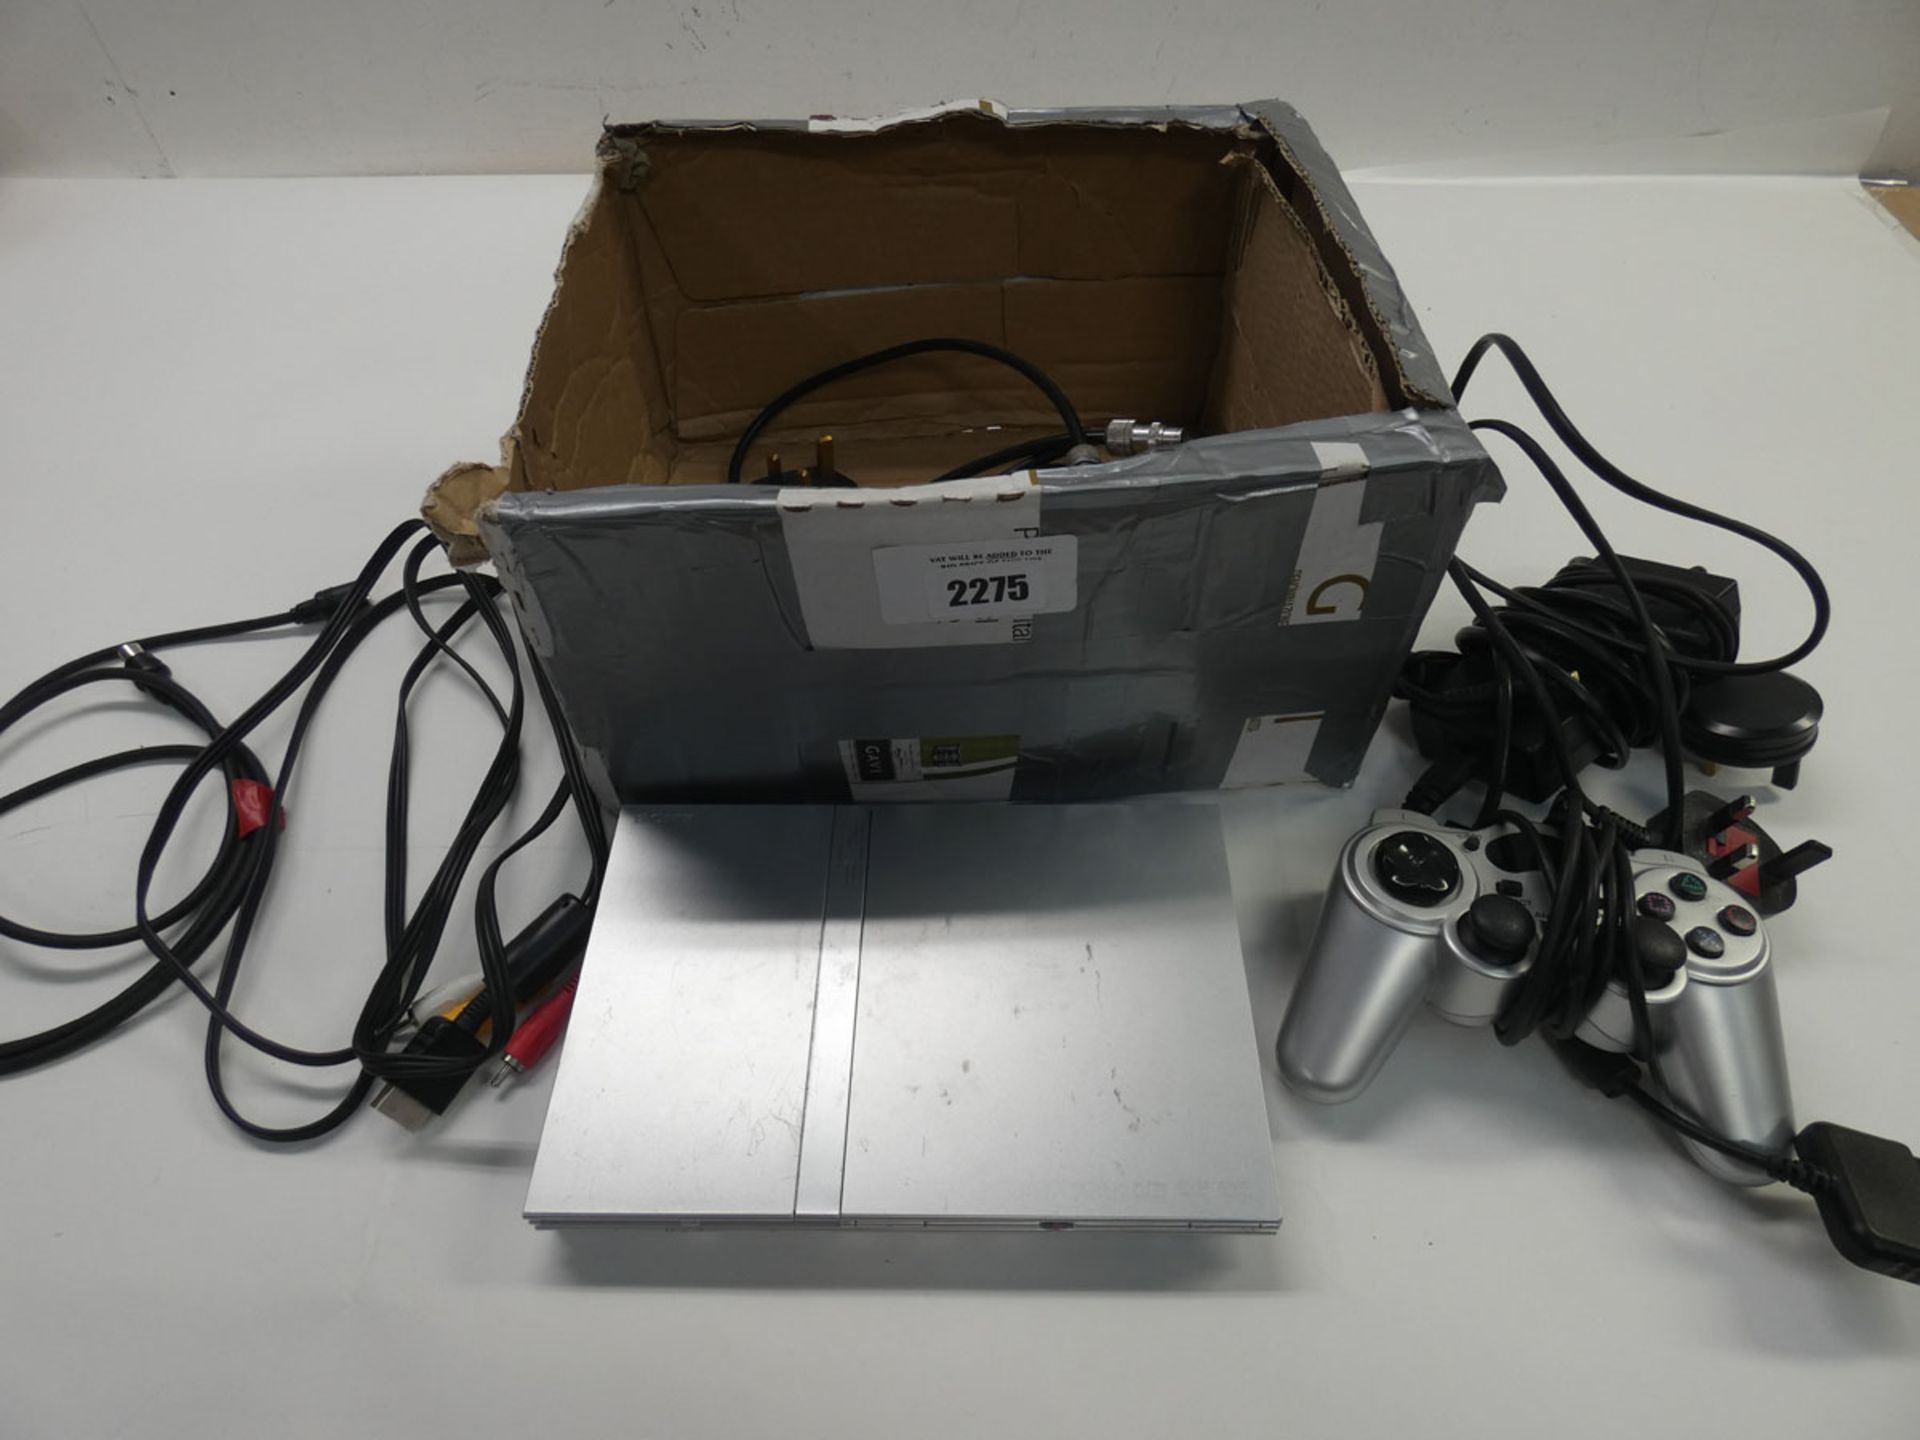 PS2 Slim in silver with accessories